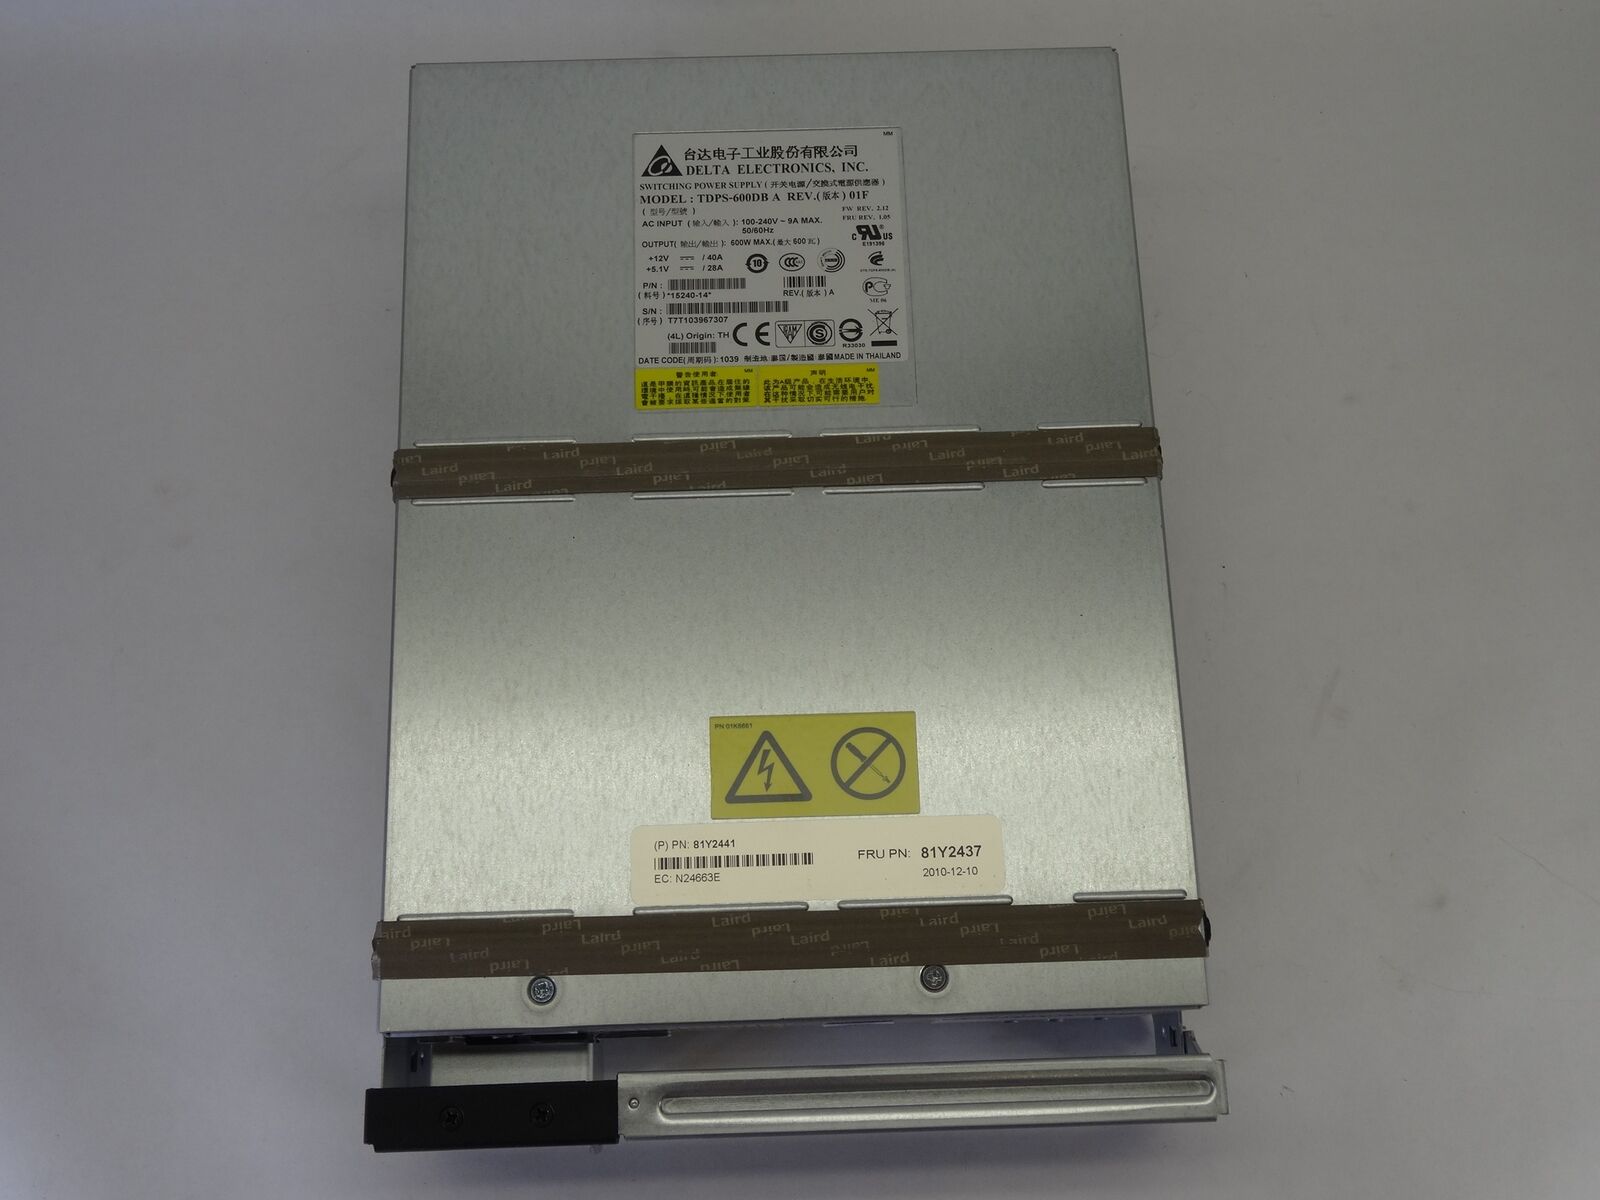 POWER SUPPLY IBM 81Y2437 FOR EXP810/DS4700 600W